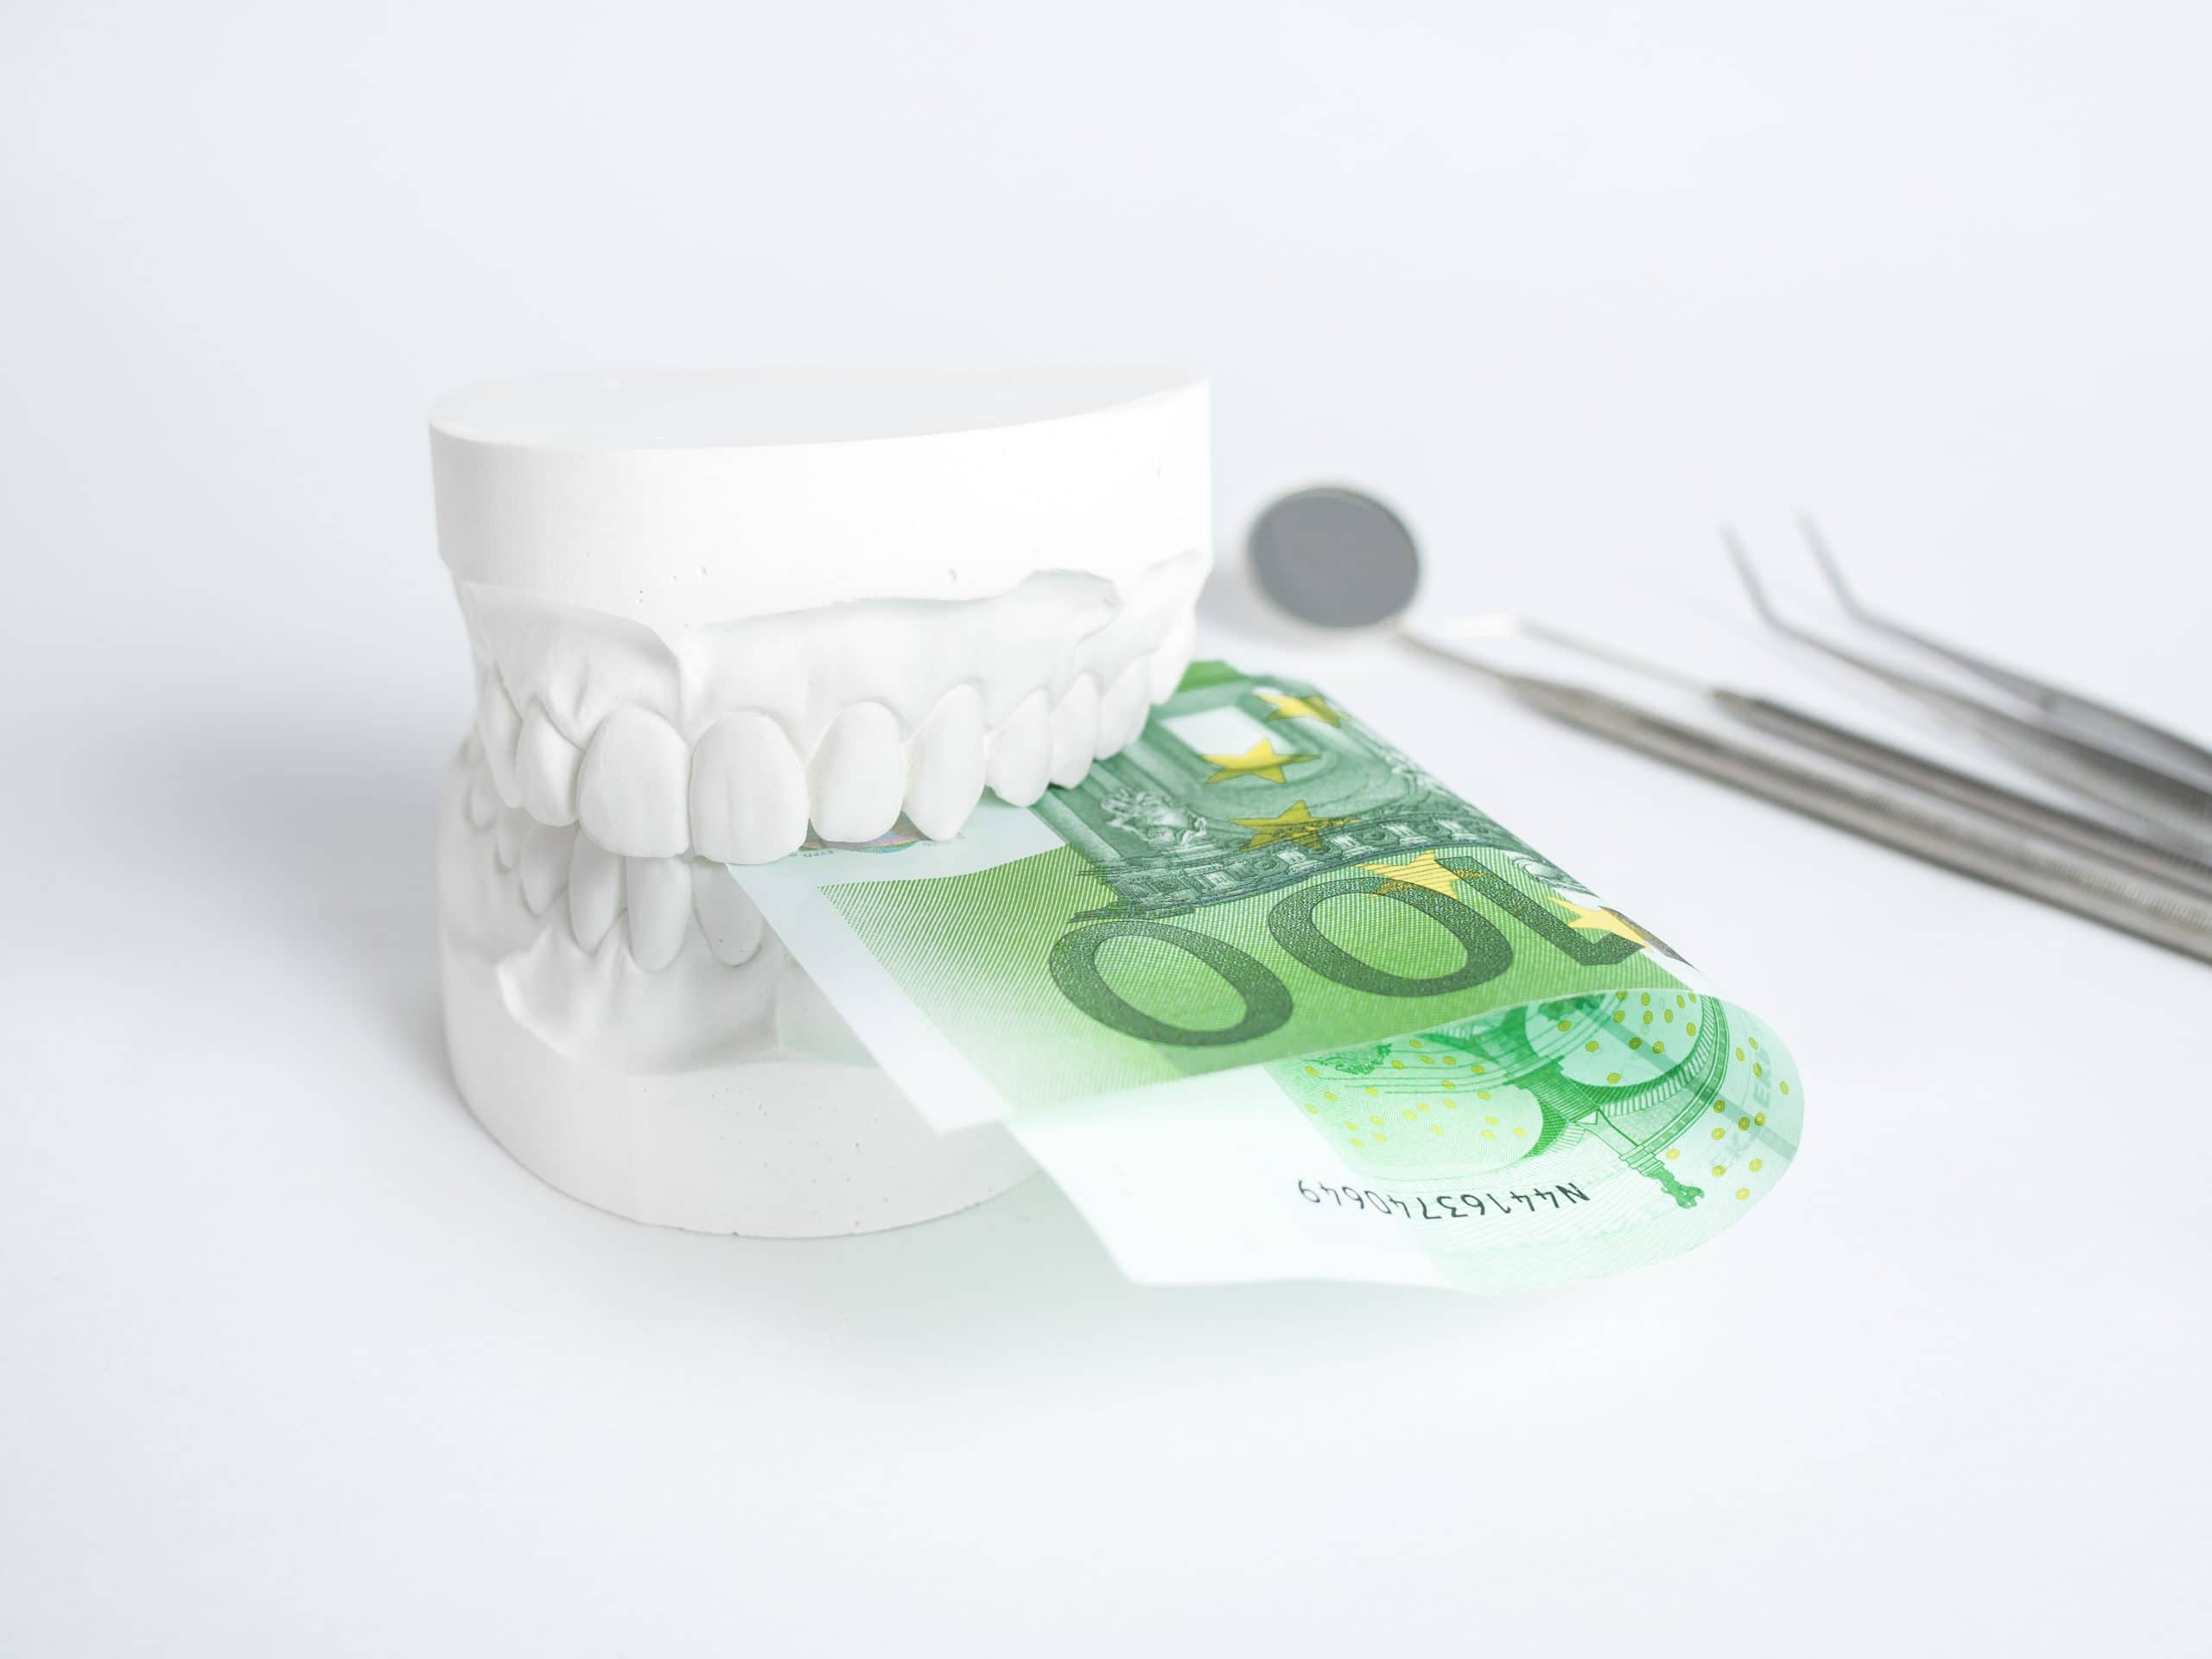 The,denture,with,tooth,money,in,euros,on,white,backgrund